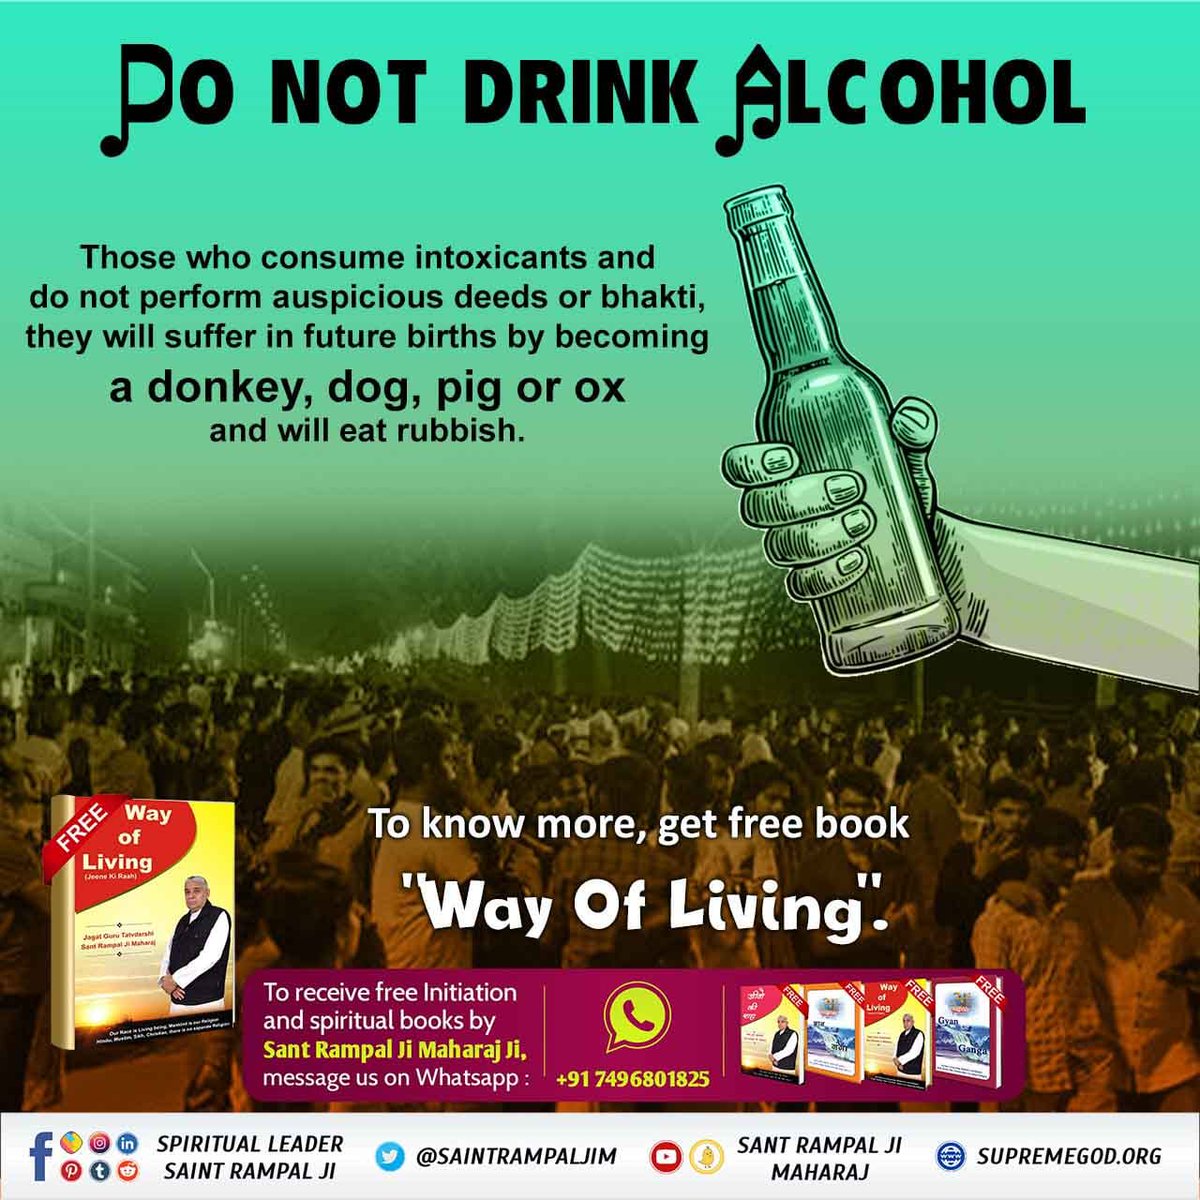 #GodNightMonday
Those who consume intoxicants and do not perform auspicious deeds or bhakti, they will suffer in future births by becoming a donkey, dog, pig or ox and will eat rubbish.
#सत_भक्ति_सन्देश